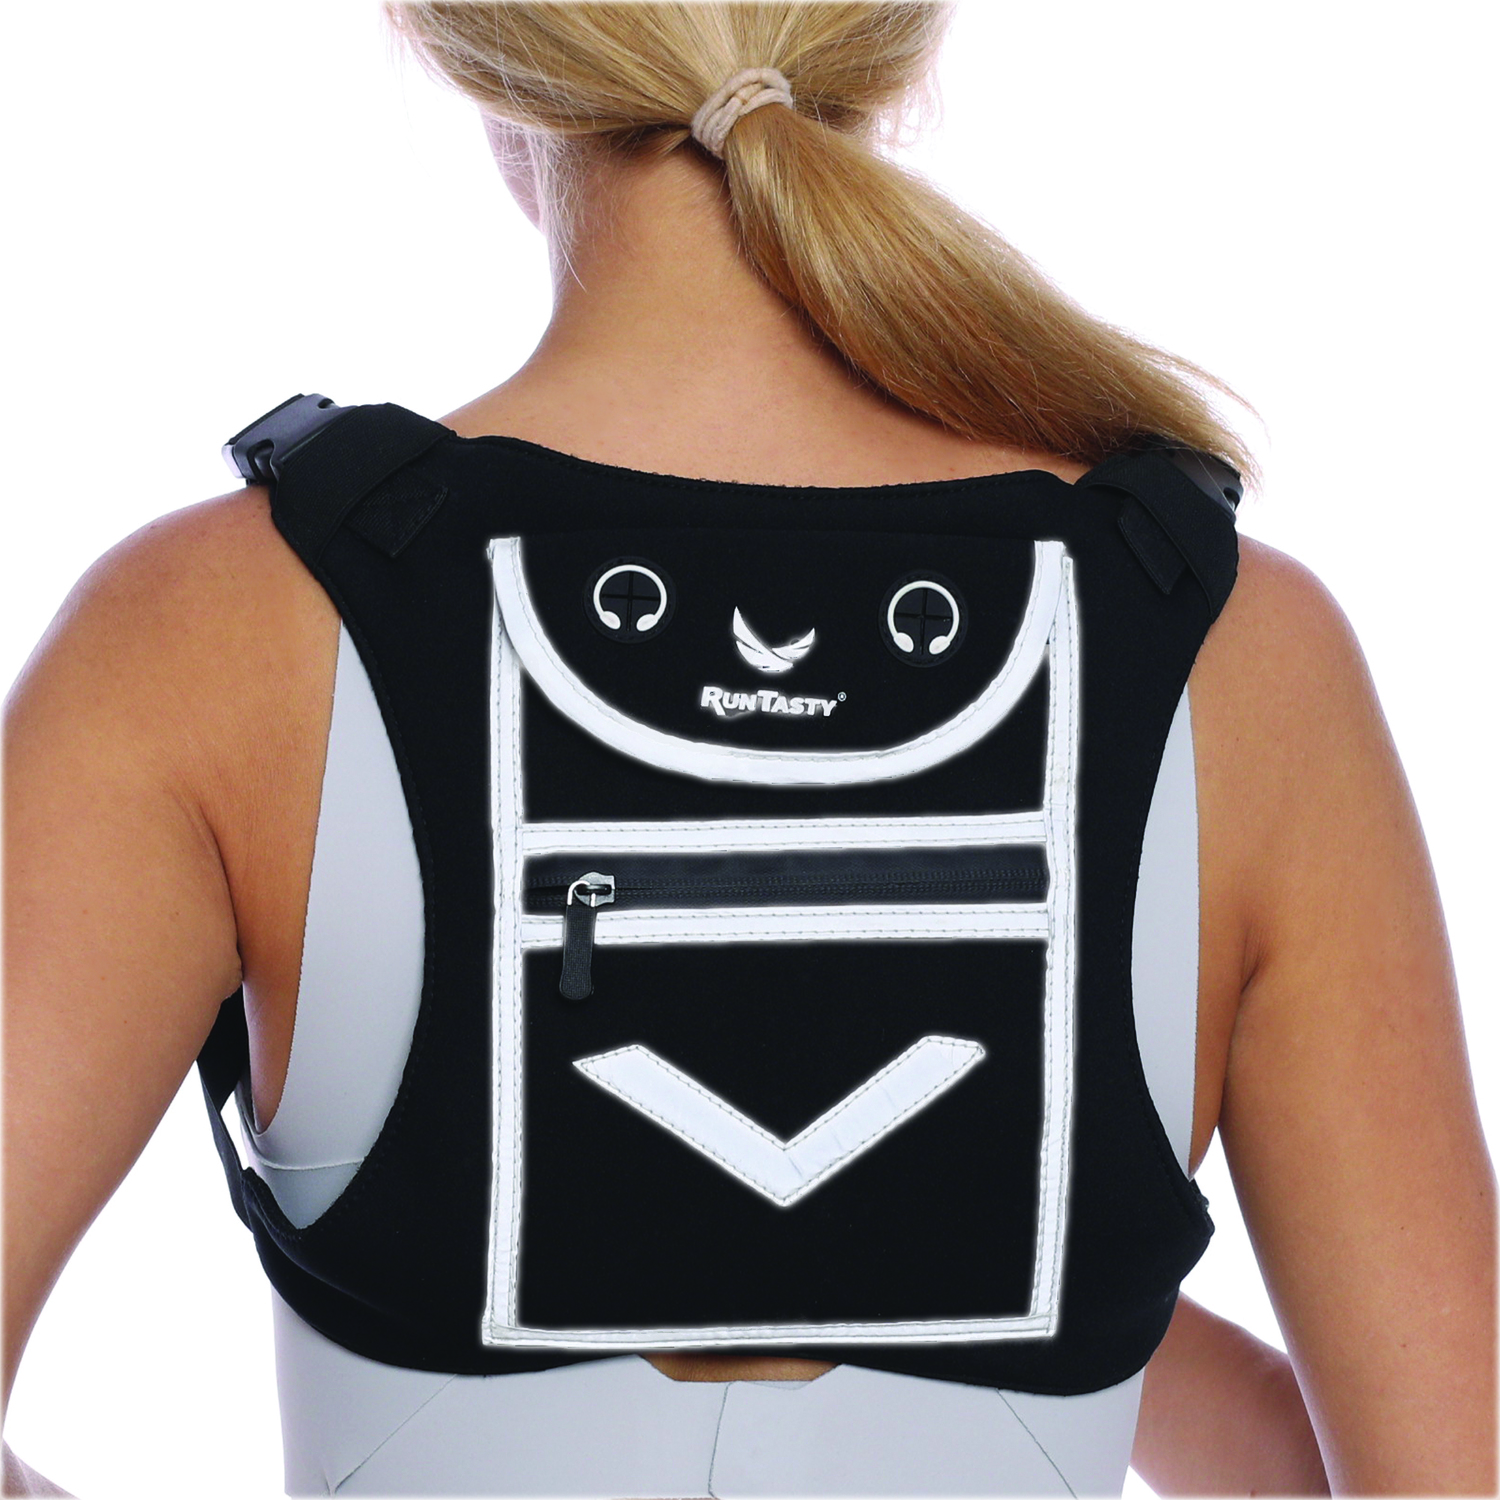 Running Mini Backpack Vest for Men &amp; Women - Fully Reflective, Holds Accessories and Any iPhone, Android Phone, iPad Mini - Lightweight Adjustable Gear for Fitness, Walking, Cycling, Hiking and More!